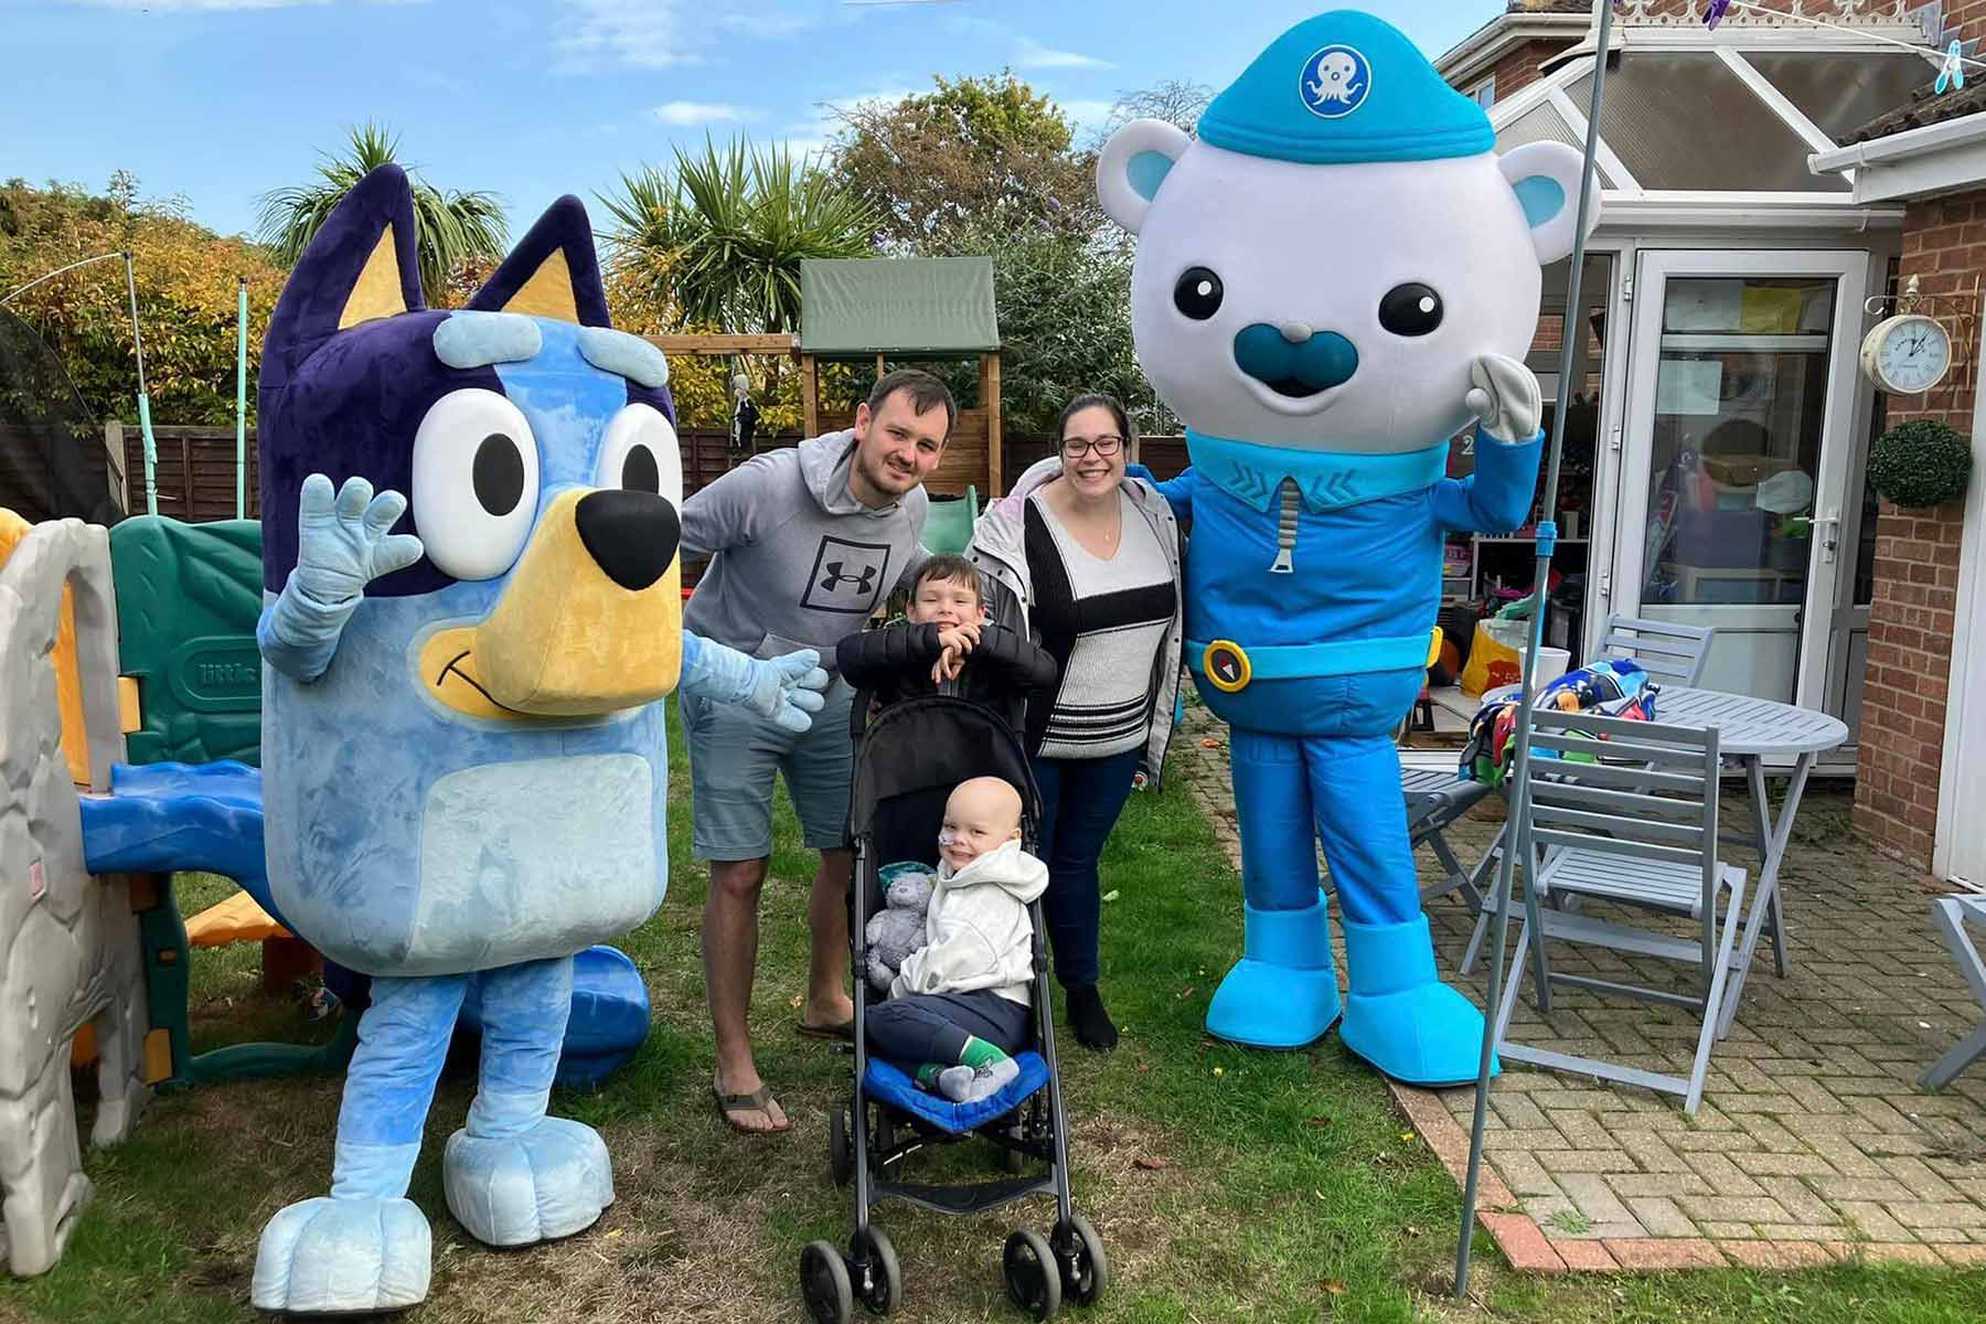 Finley and his family in their garden with two of the Paw Patrol characters.